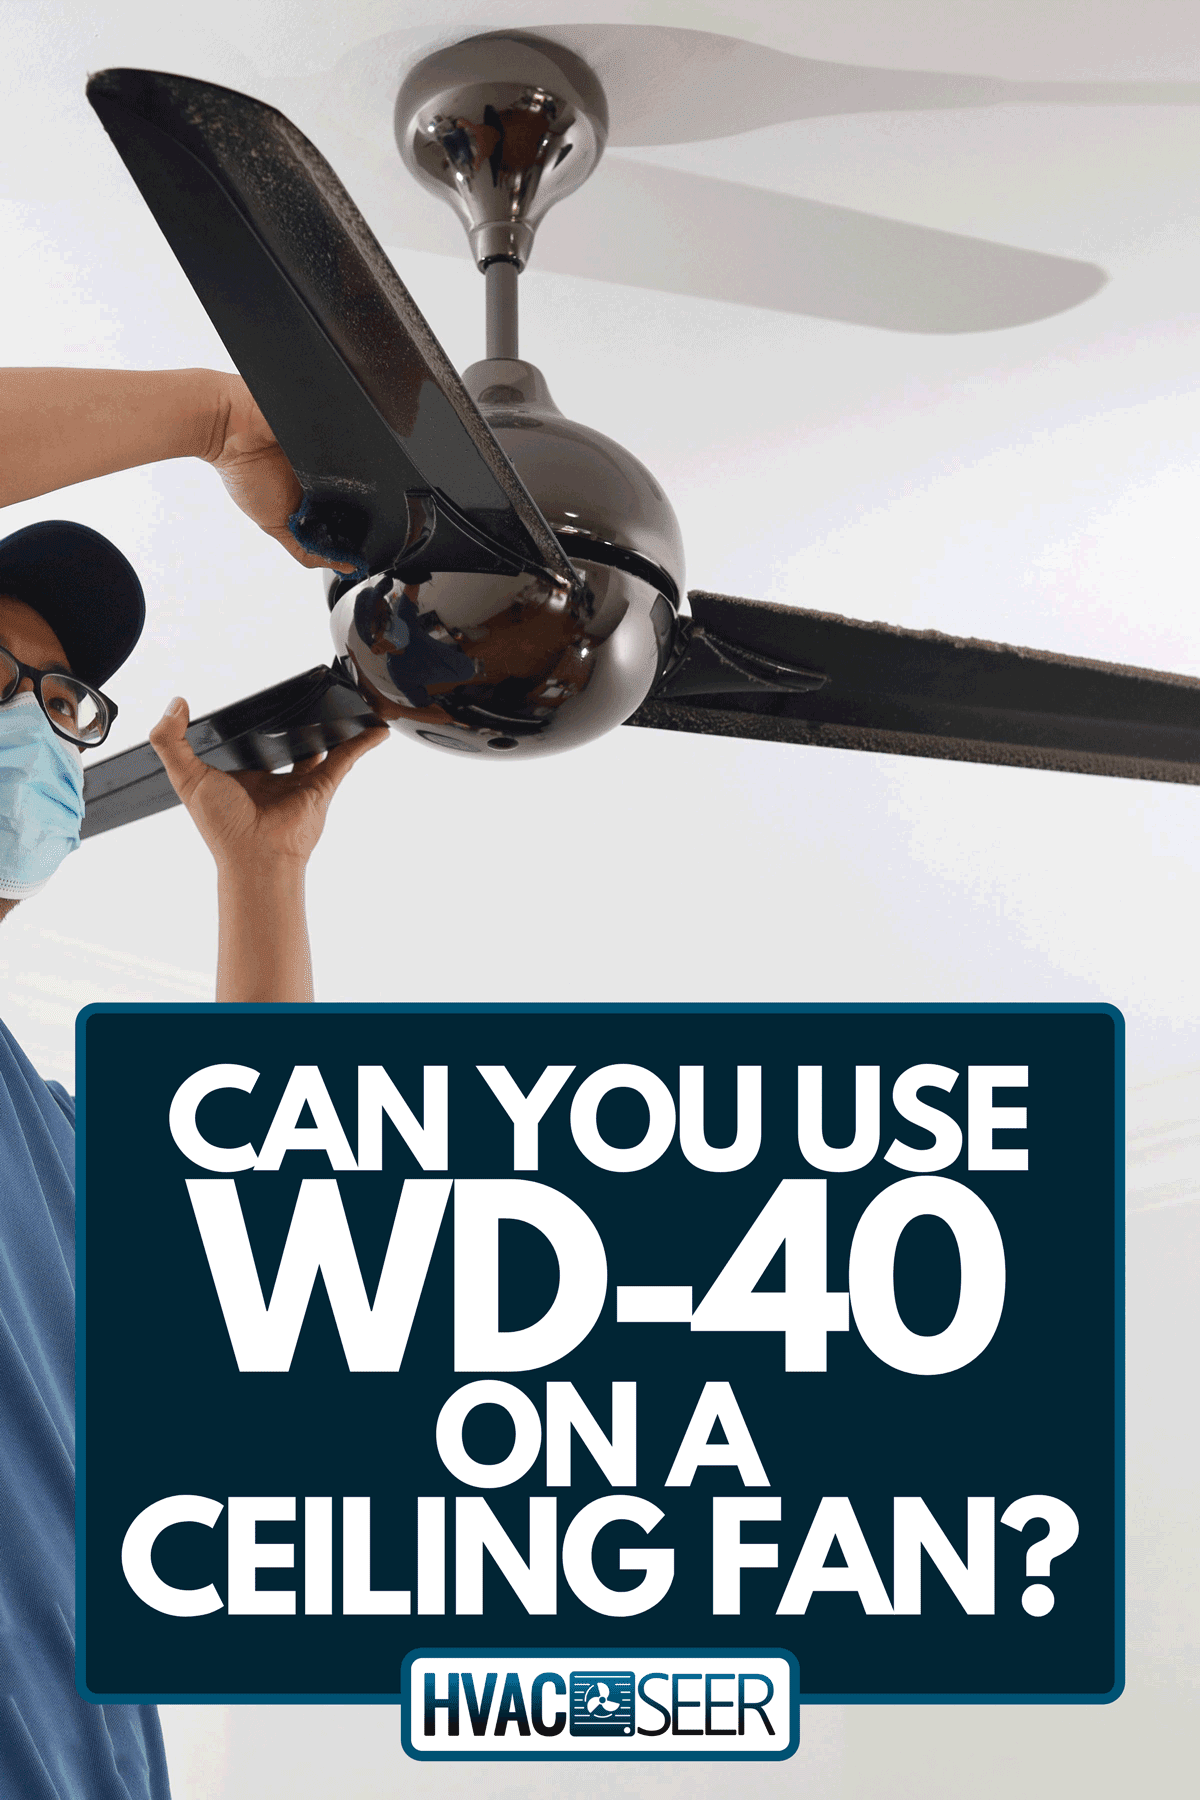 A man with a protective mask cleaning a ceiling fan, Can You Use WD-40 On A Ceiling Fan?